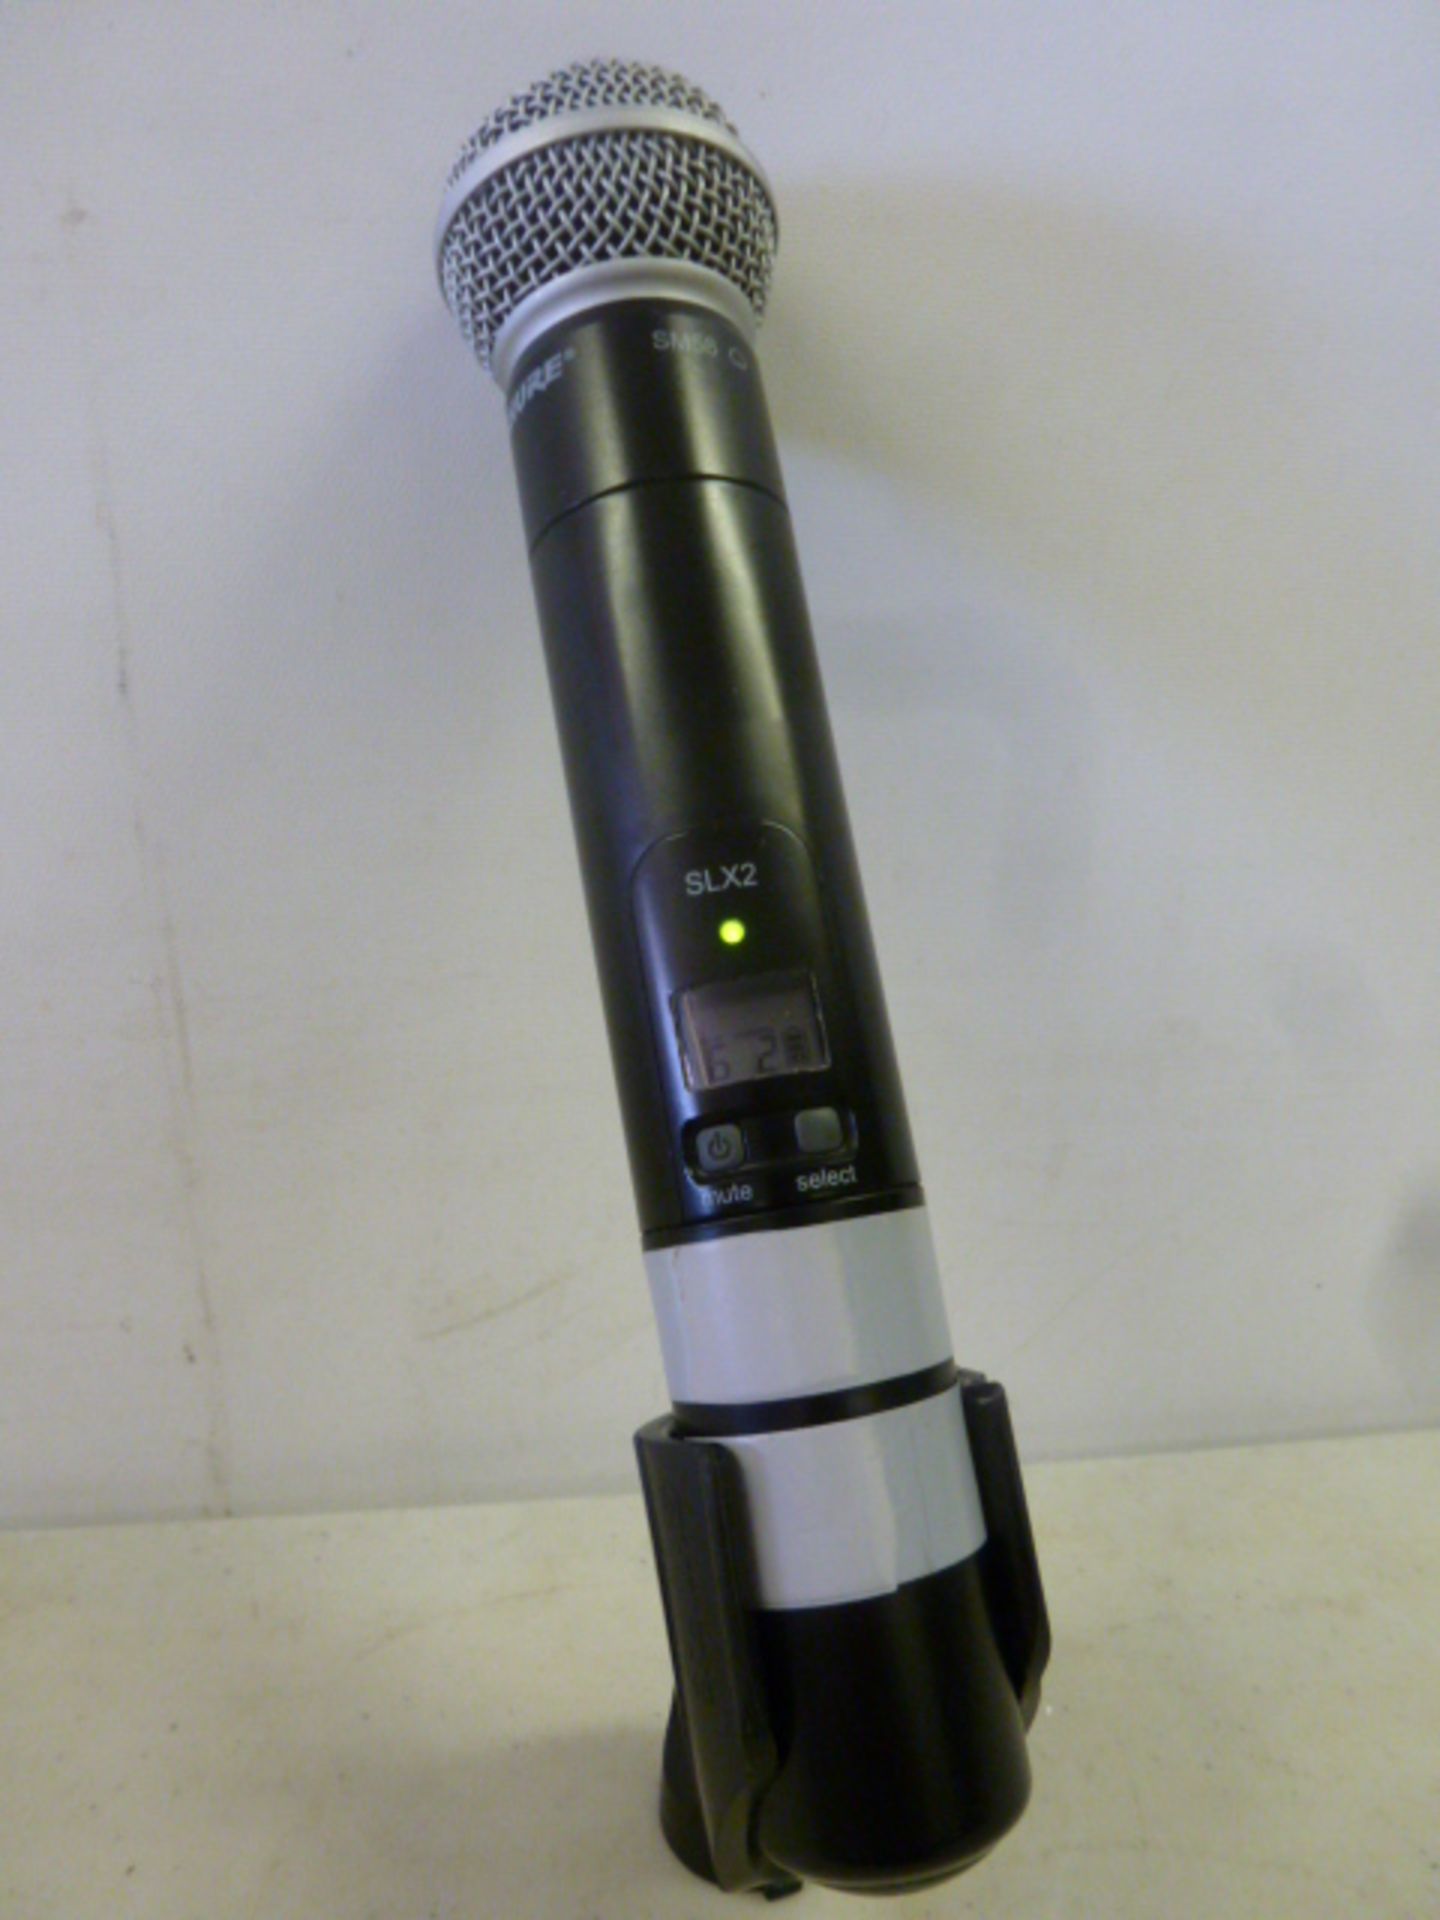 Shure SM58 Wireless Microphone In Black, Model SLX2. Comes with Black Pouch & Microphone Stand - Image 2 of 2